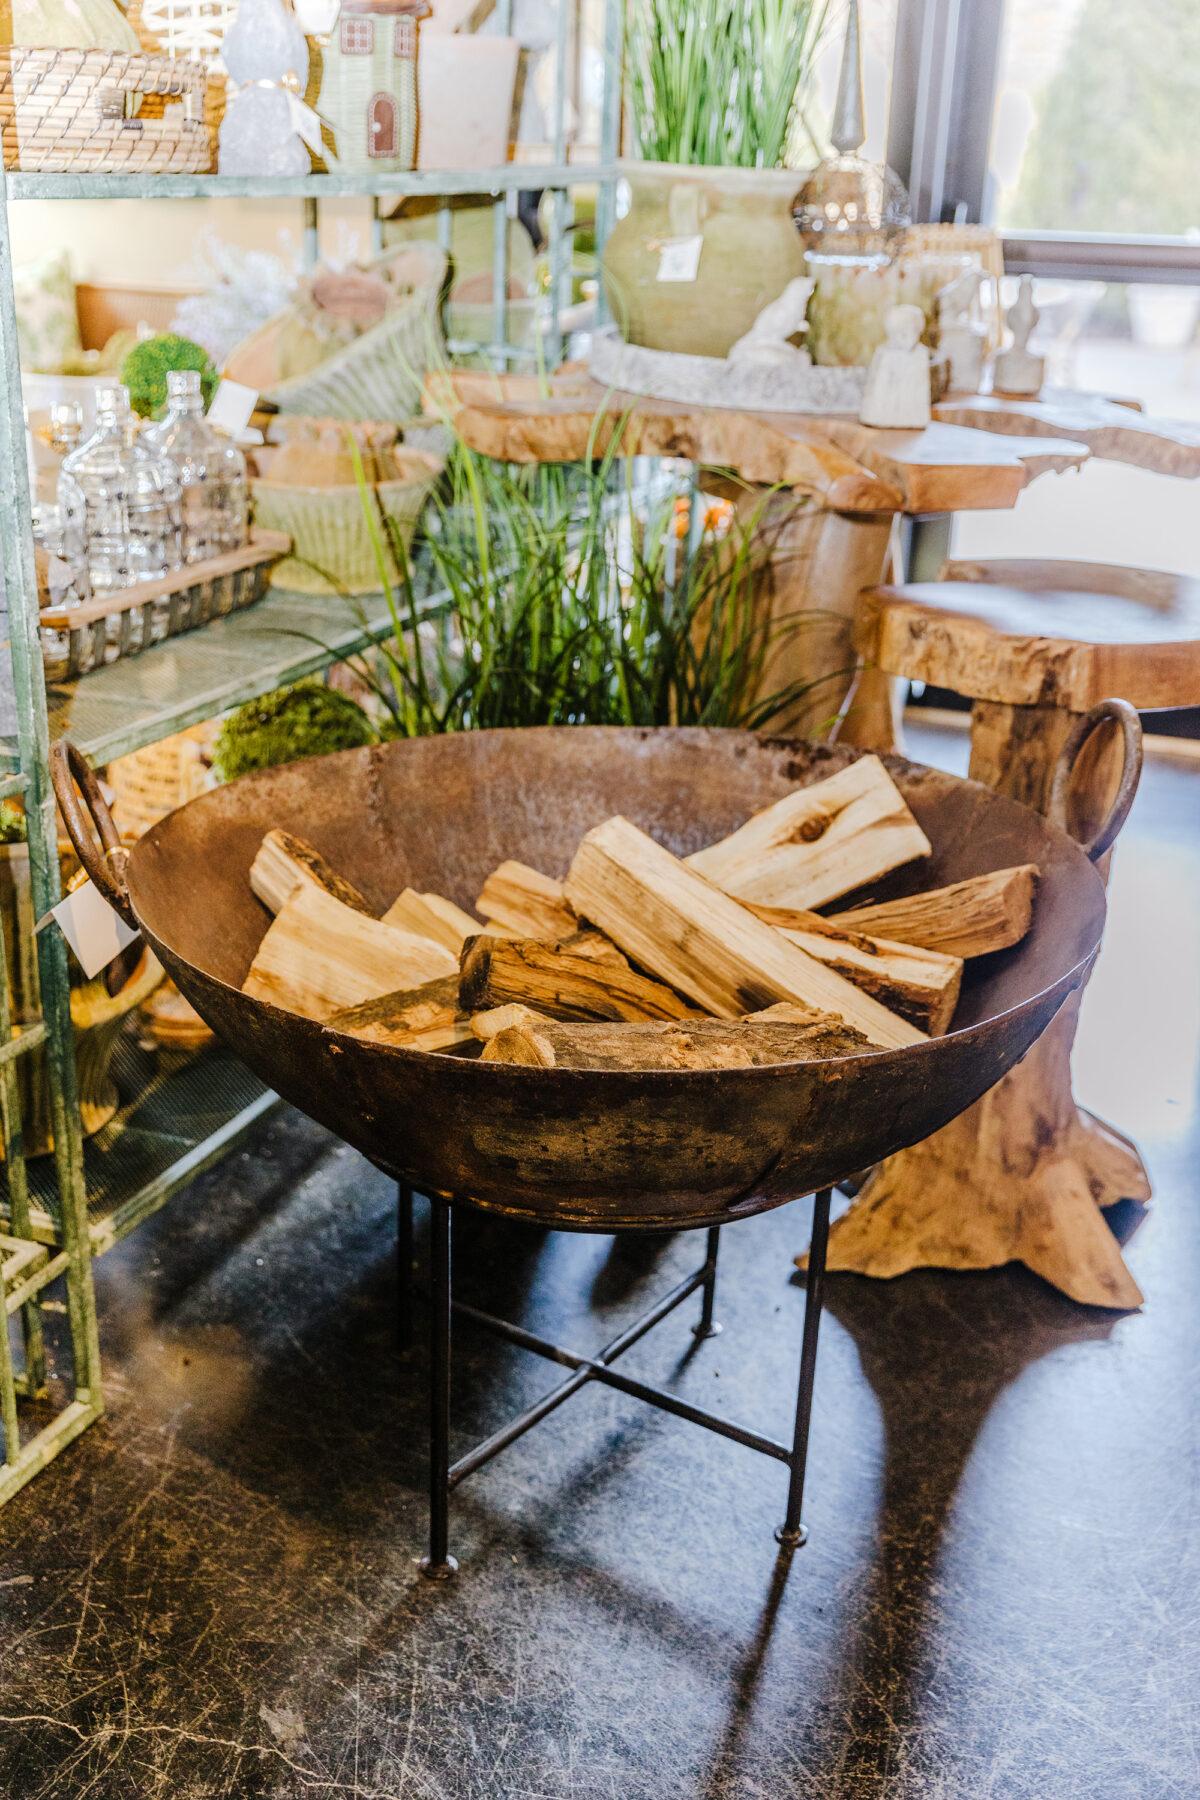 A fire bowl is not only lovely, but this wood-burning option is also highly mobile and can be moved around between uses depending on where you need it. (Nell Hill’s/TNS)